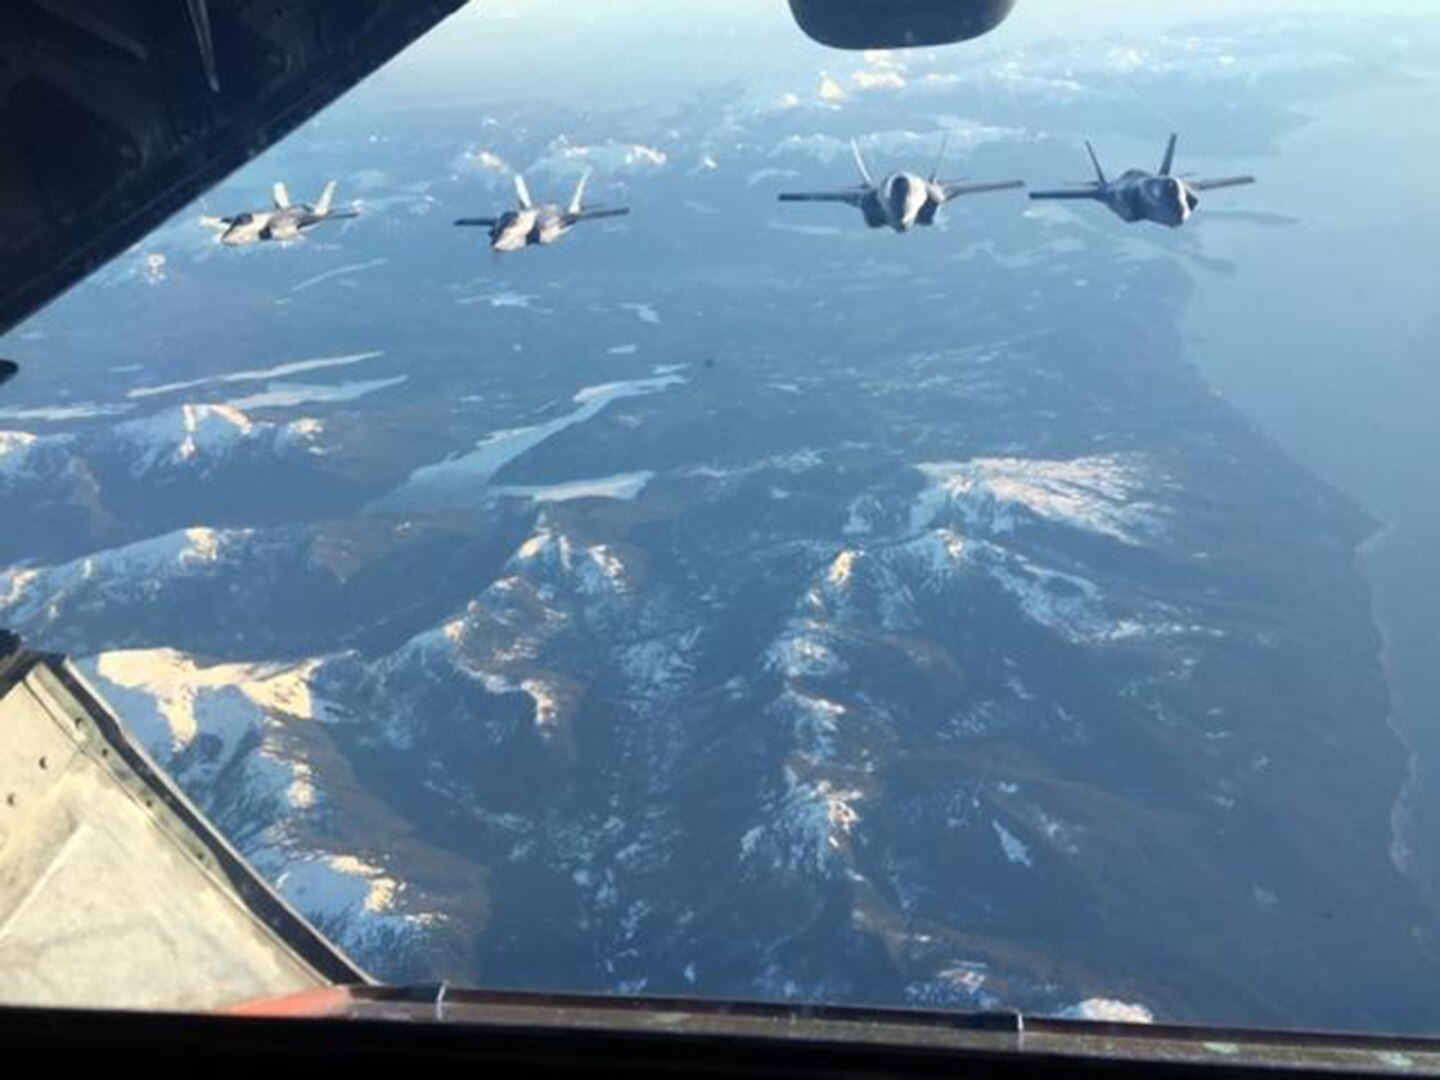 Marine Corps F-35Bs from Marine Fighter Attack Squadron (VMFA) 121, 3rd Marine Aircraft Wing, transit the Pacific from Marine Corps Air Station Yuma, Ariz., to Joint Base Elmendorf-Richardson, Alaska, Jan. 9, 2017, with its final destination of Iwakuni, Japan.  VMFA-121 is the first operational F-35B squadron assigned to the Fleet Marine Force, with its relocation to 1st Marine Aircraft Wing at Iwakuni.  The F-35B was developed to replace the Marine Corps’ F/A-18 Hornet, AV-8B Harrier and EA- 6B Prowler. The Short Take-off Vertical Landing (STOVL) aircraft is a true force multiplier. The unique combination of stealth, cutting-edge radar and sensor technology, and electronic warfare systems bring all of the access and lethality capabilities of a fifth-generation fighter, a modern bomber, and an adverse-weather, all-threat environment air support platform.